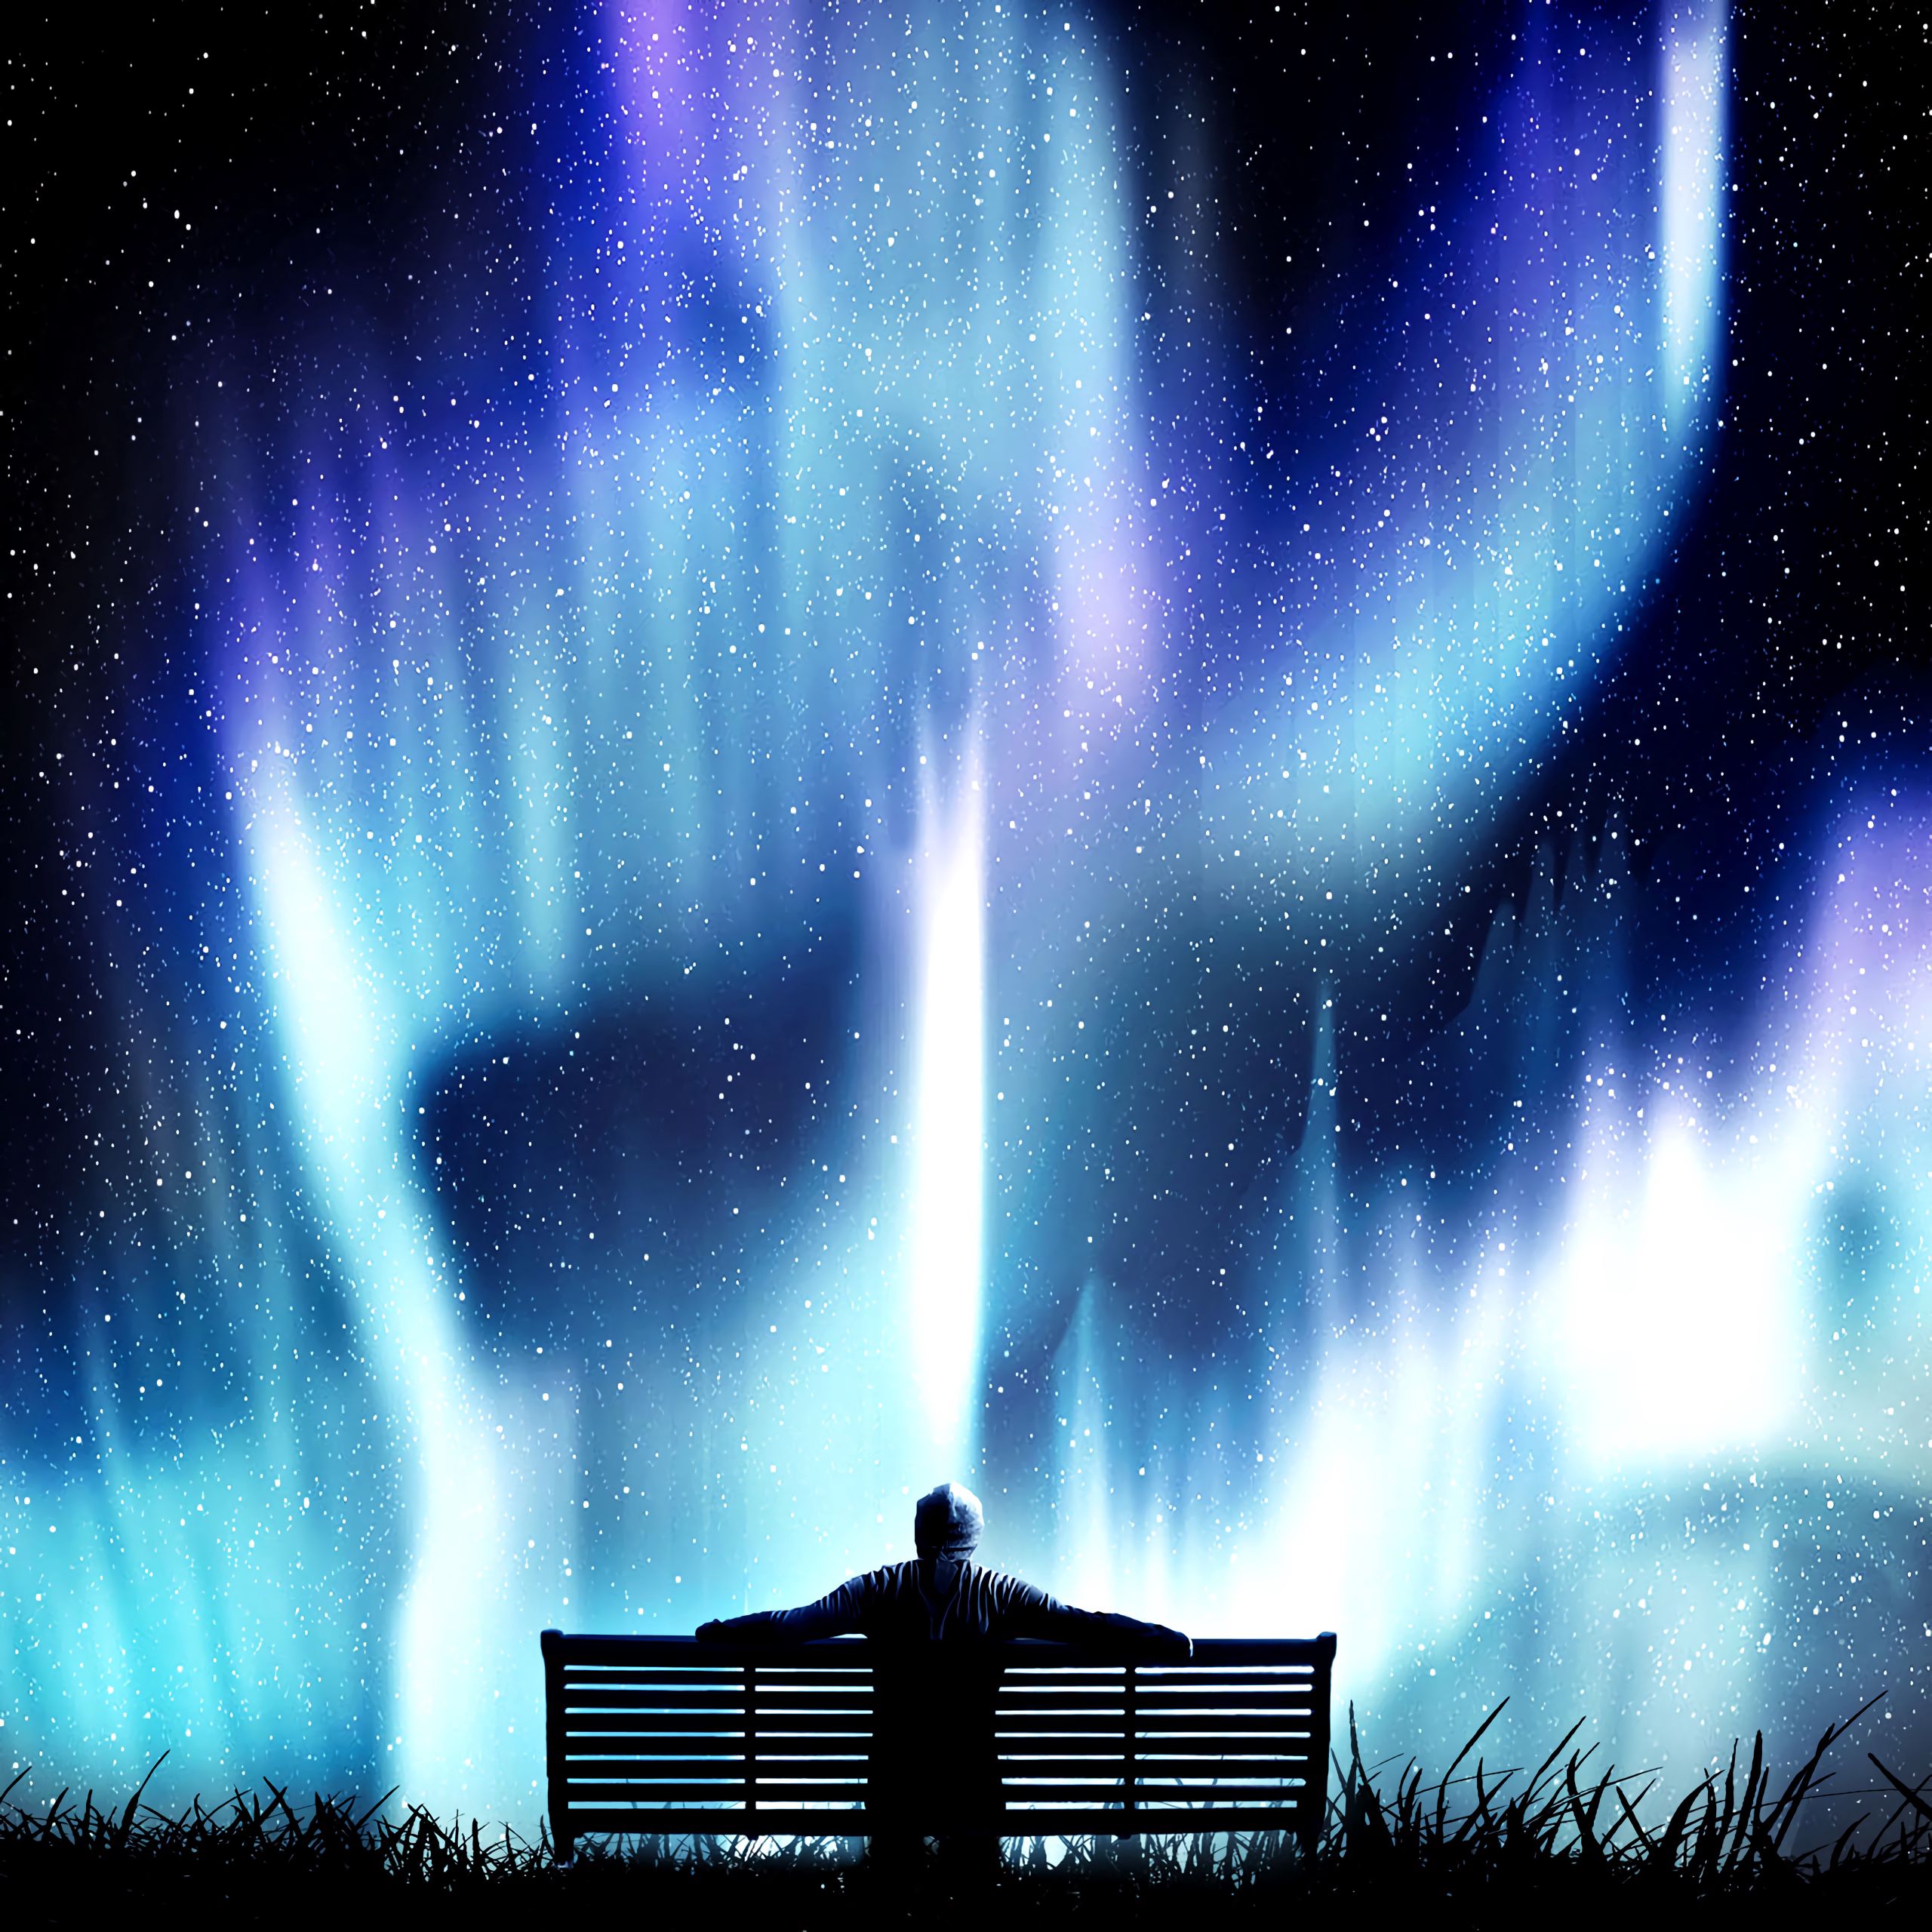 northern lights, nature, starry sky, loneliness, photoshop, aurora borealis, bench High Definition image